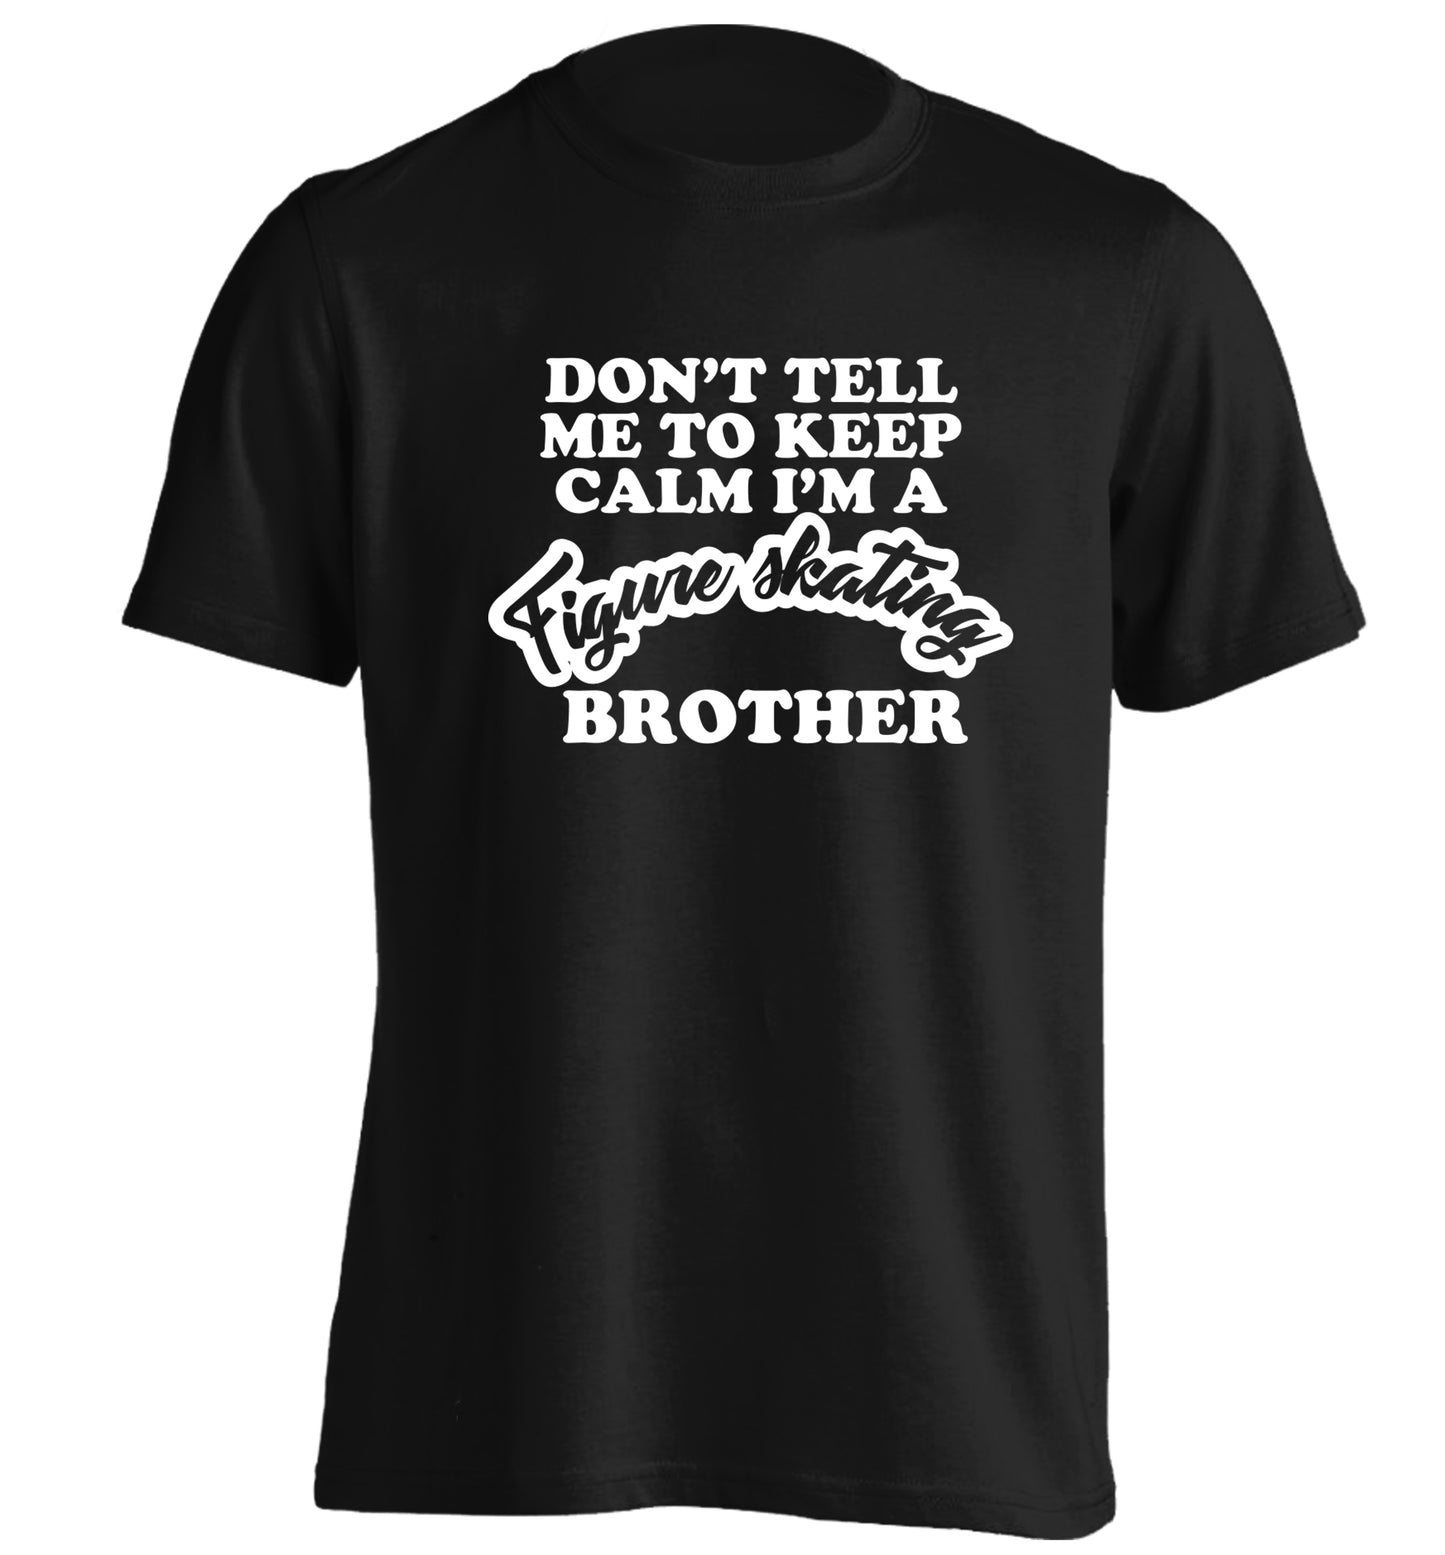 Don't tell me to keep calm I'm a figure skating brother adults unisexblack Tshirt 2XL